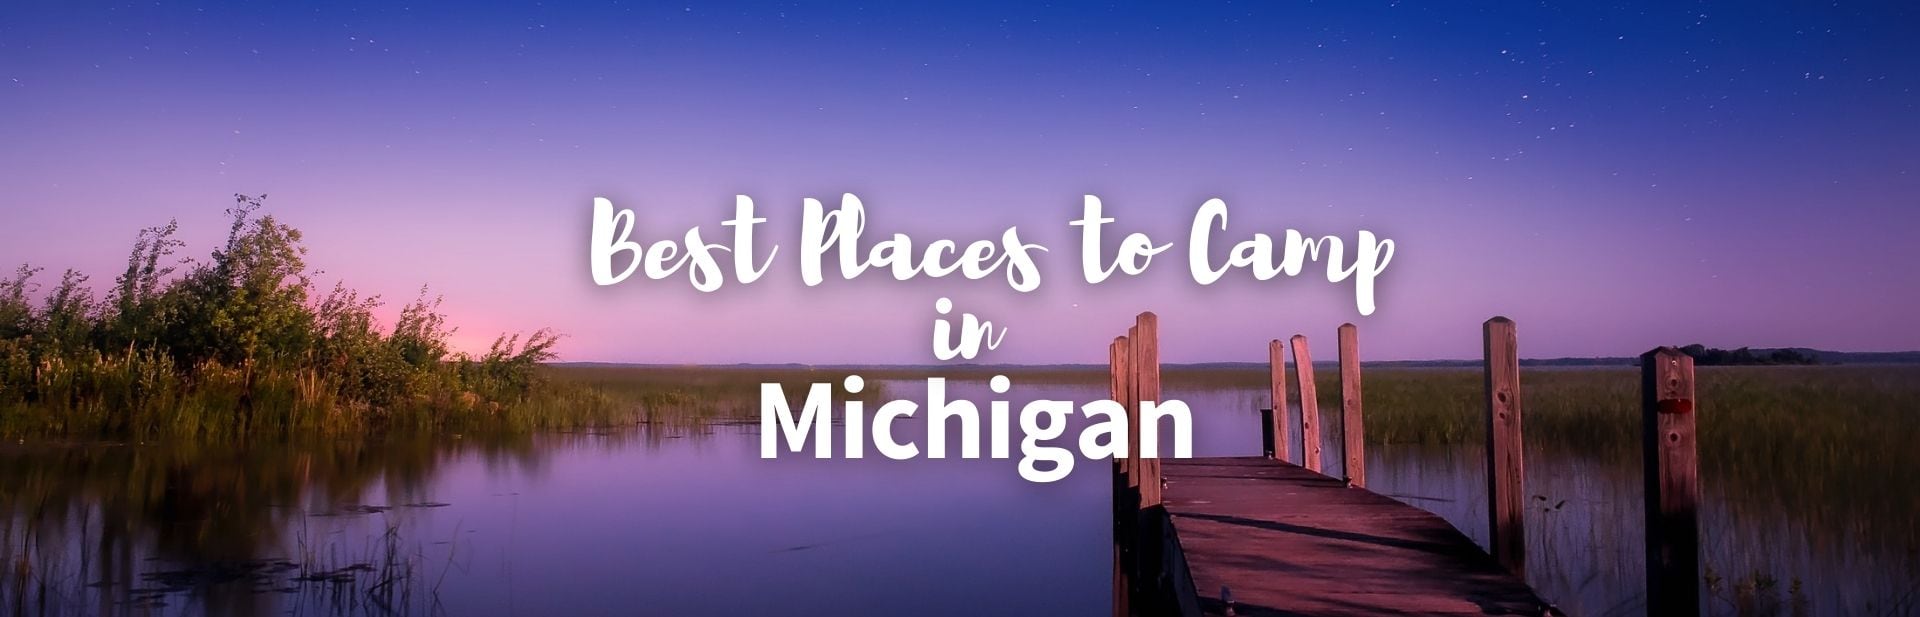 The Ultimate Guide to The Best Places to Camp in Michigan